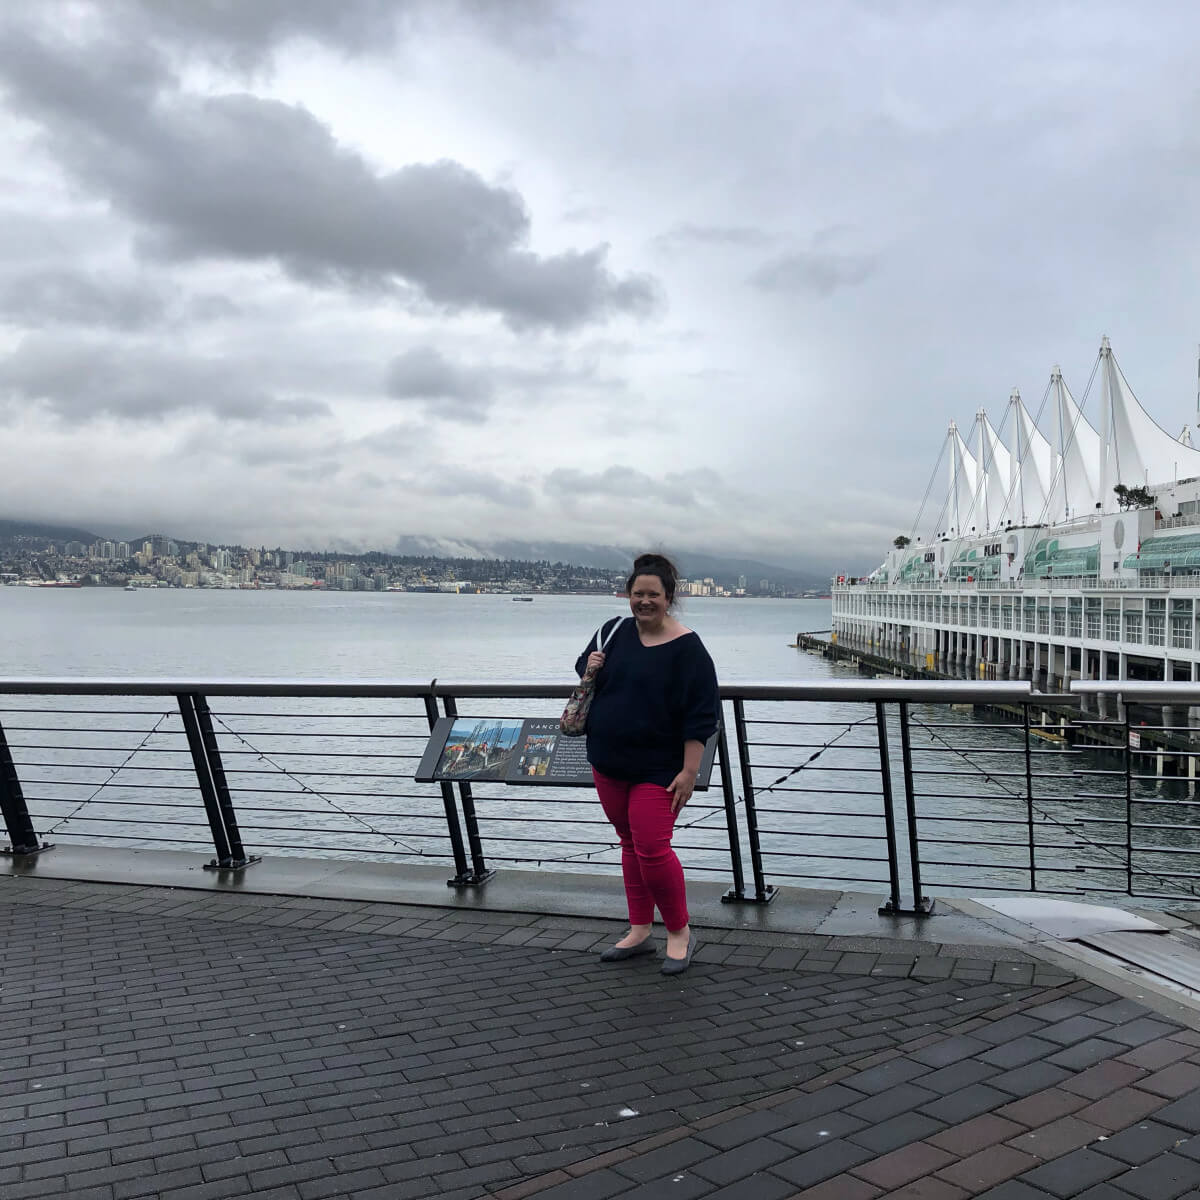 Vancouver is lovely!